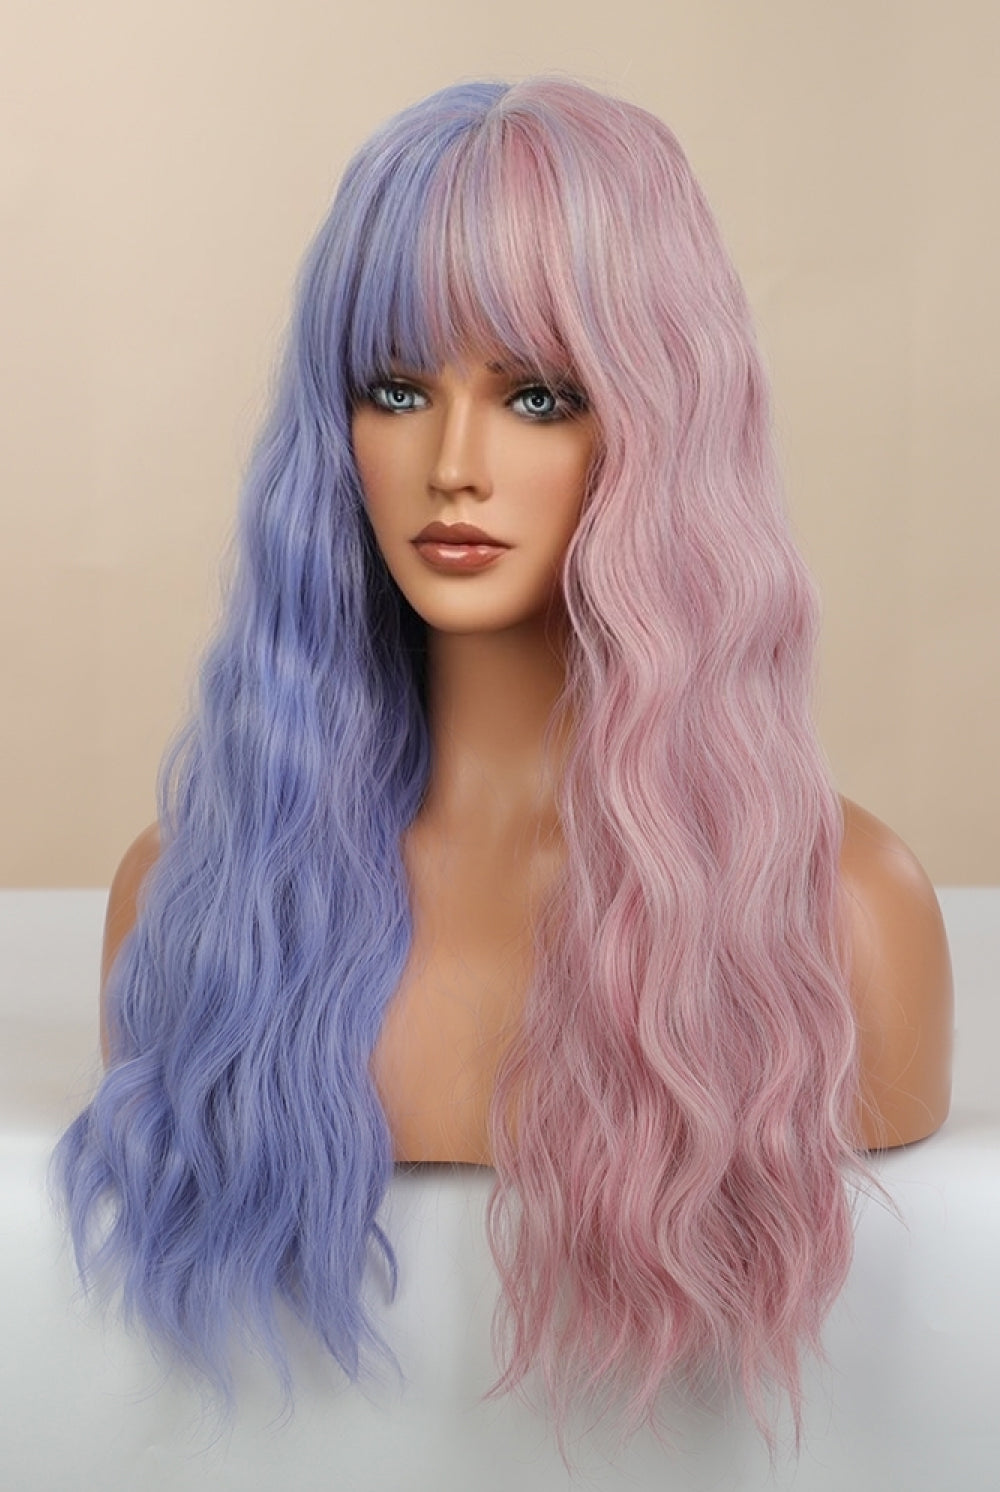 Dark Gray Play Good For You 13*1" Full-Machine Wigs Synthetic Long Wave 26" in Blue/Pink Split Dye Wigs